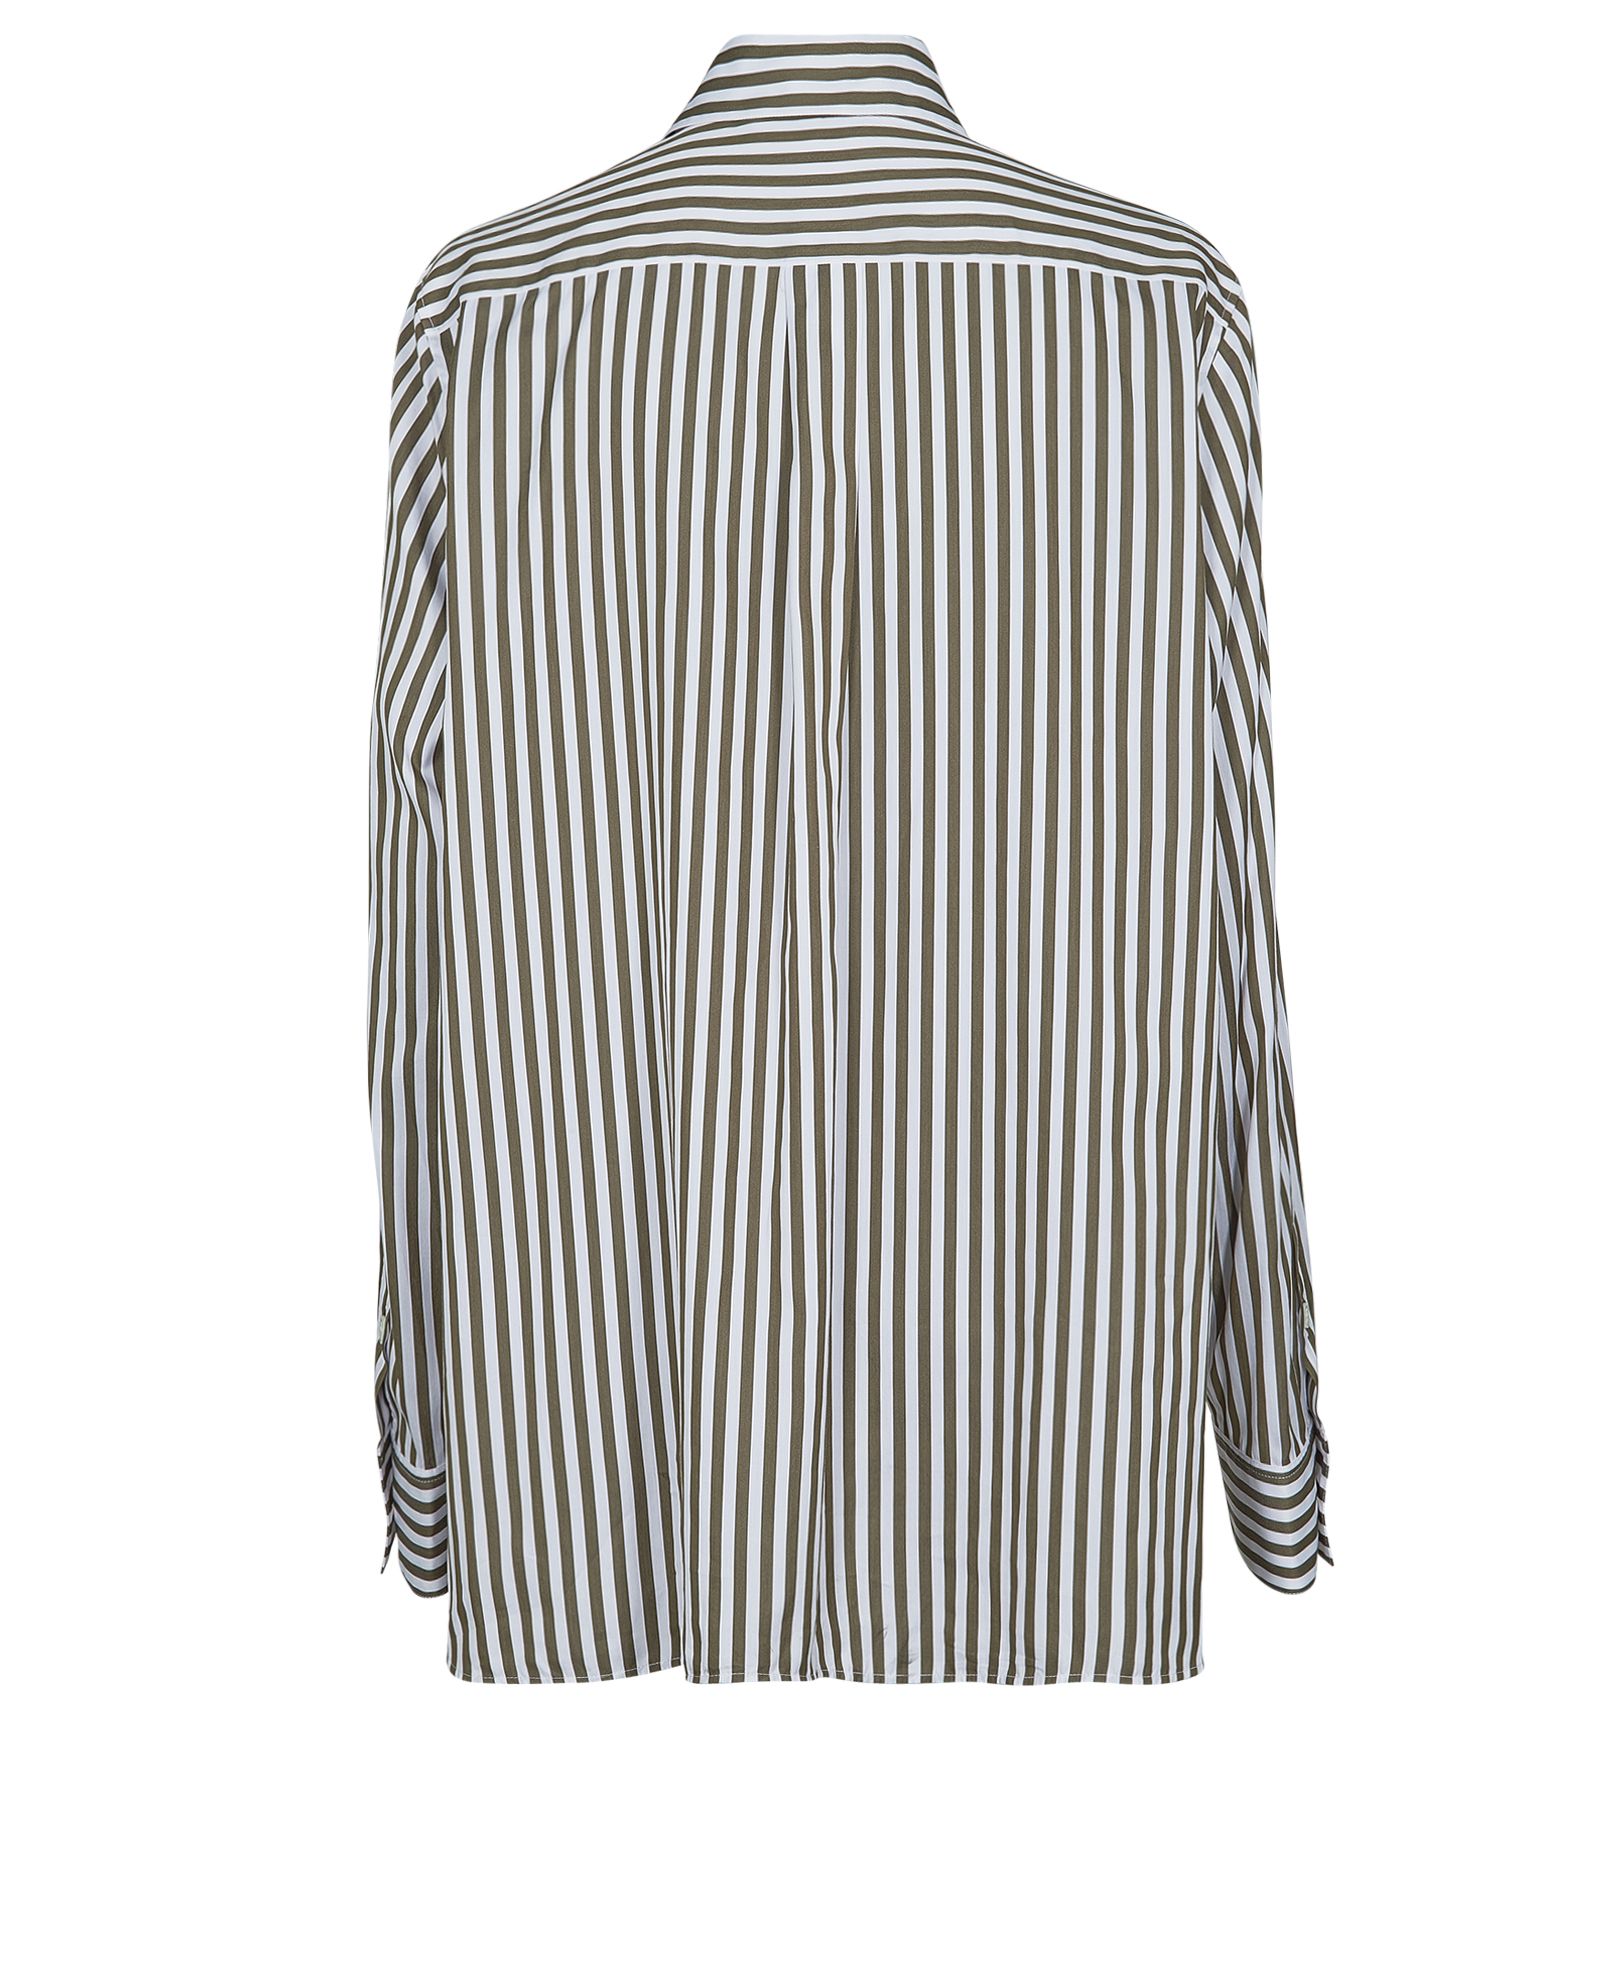 Mulberry Striped Shirt, Tops - Designer Exchange | Buy Sell Exchange